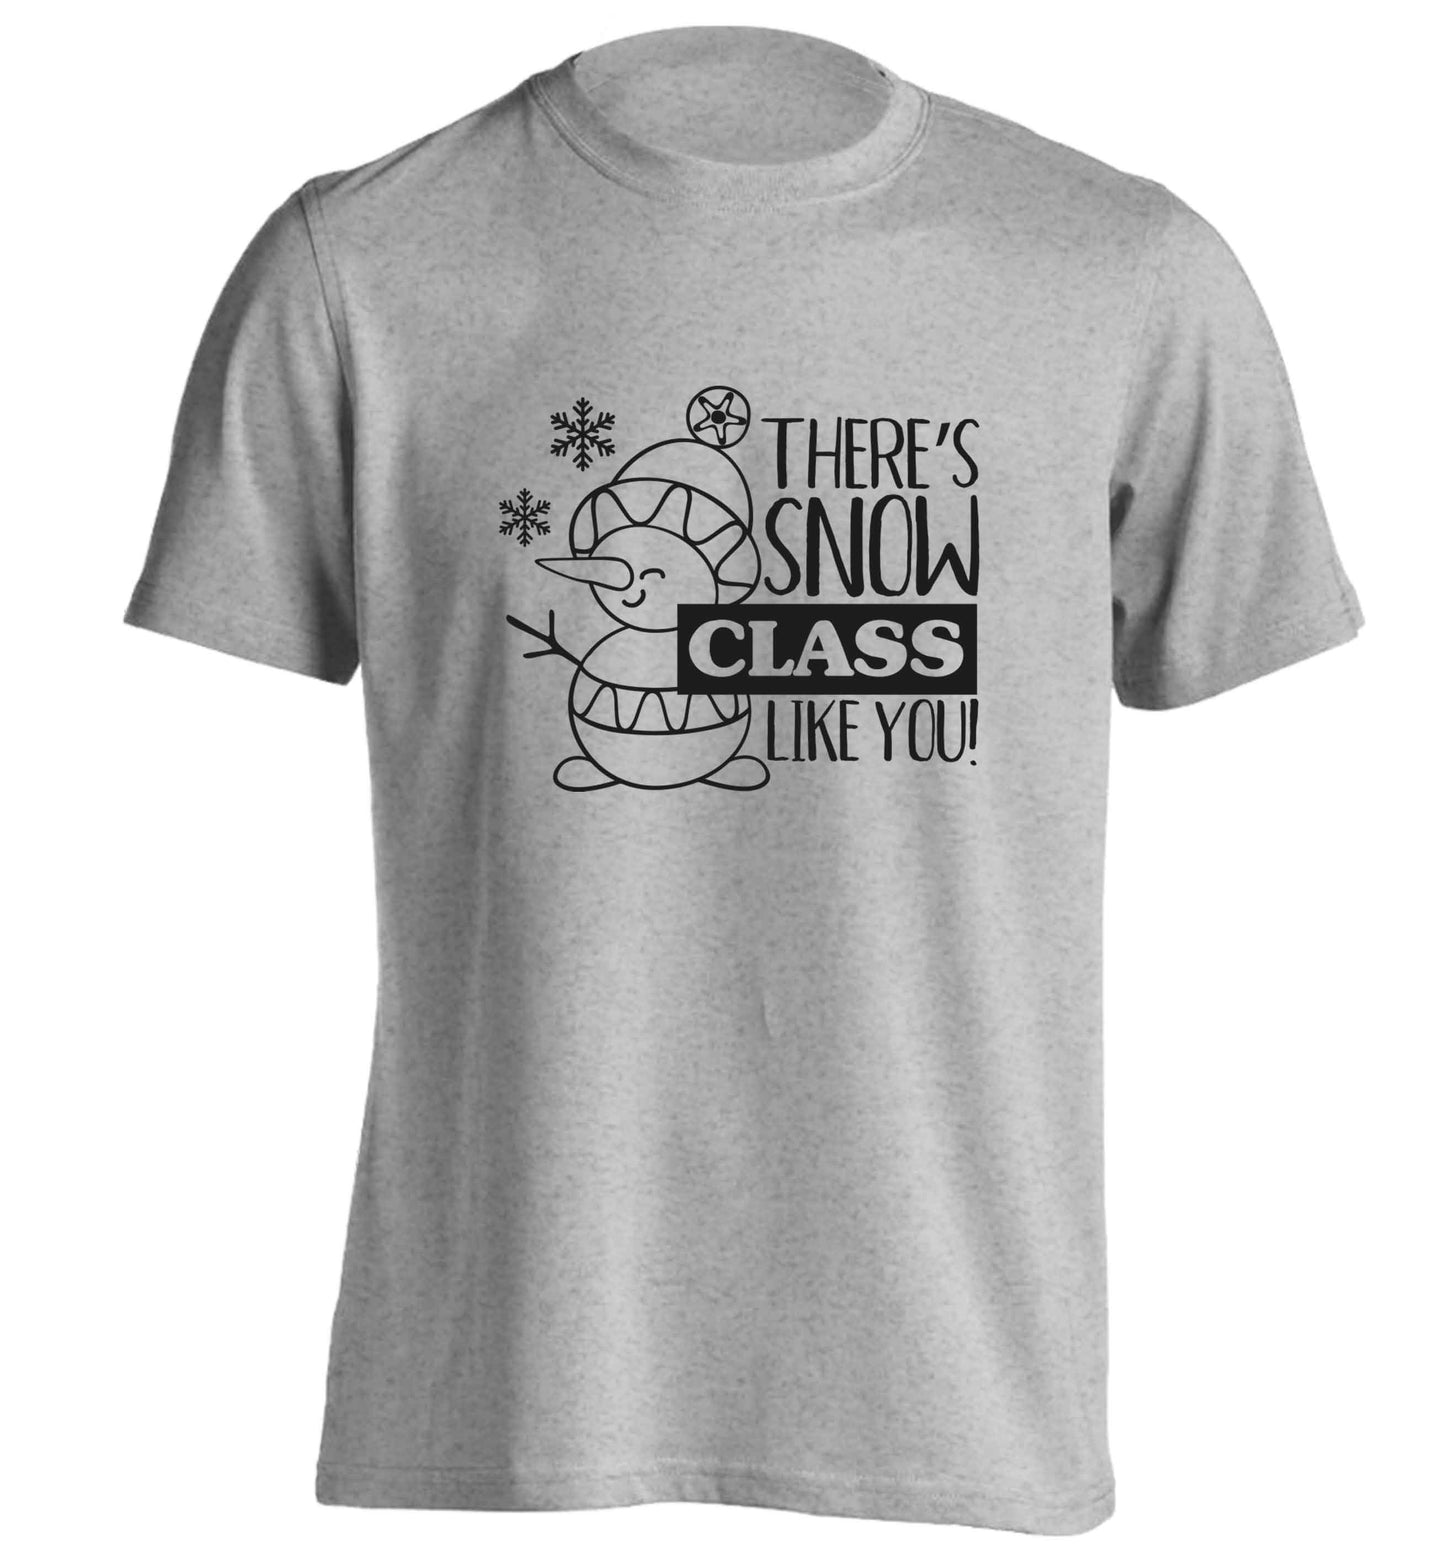 There's snow class like you adults unisex grey Tshirt 2XL